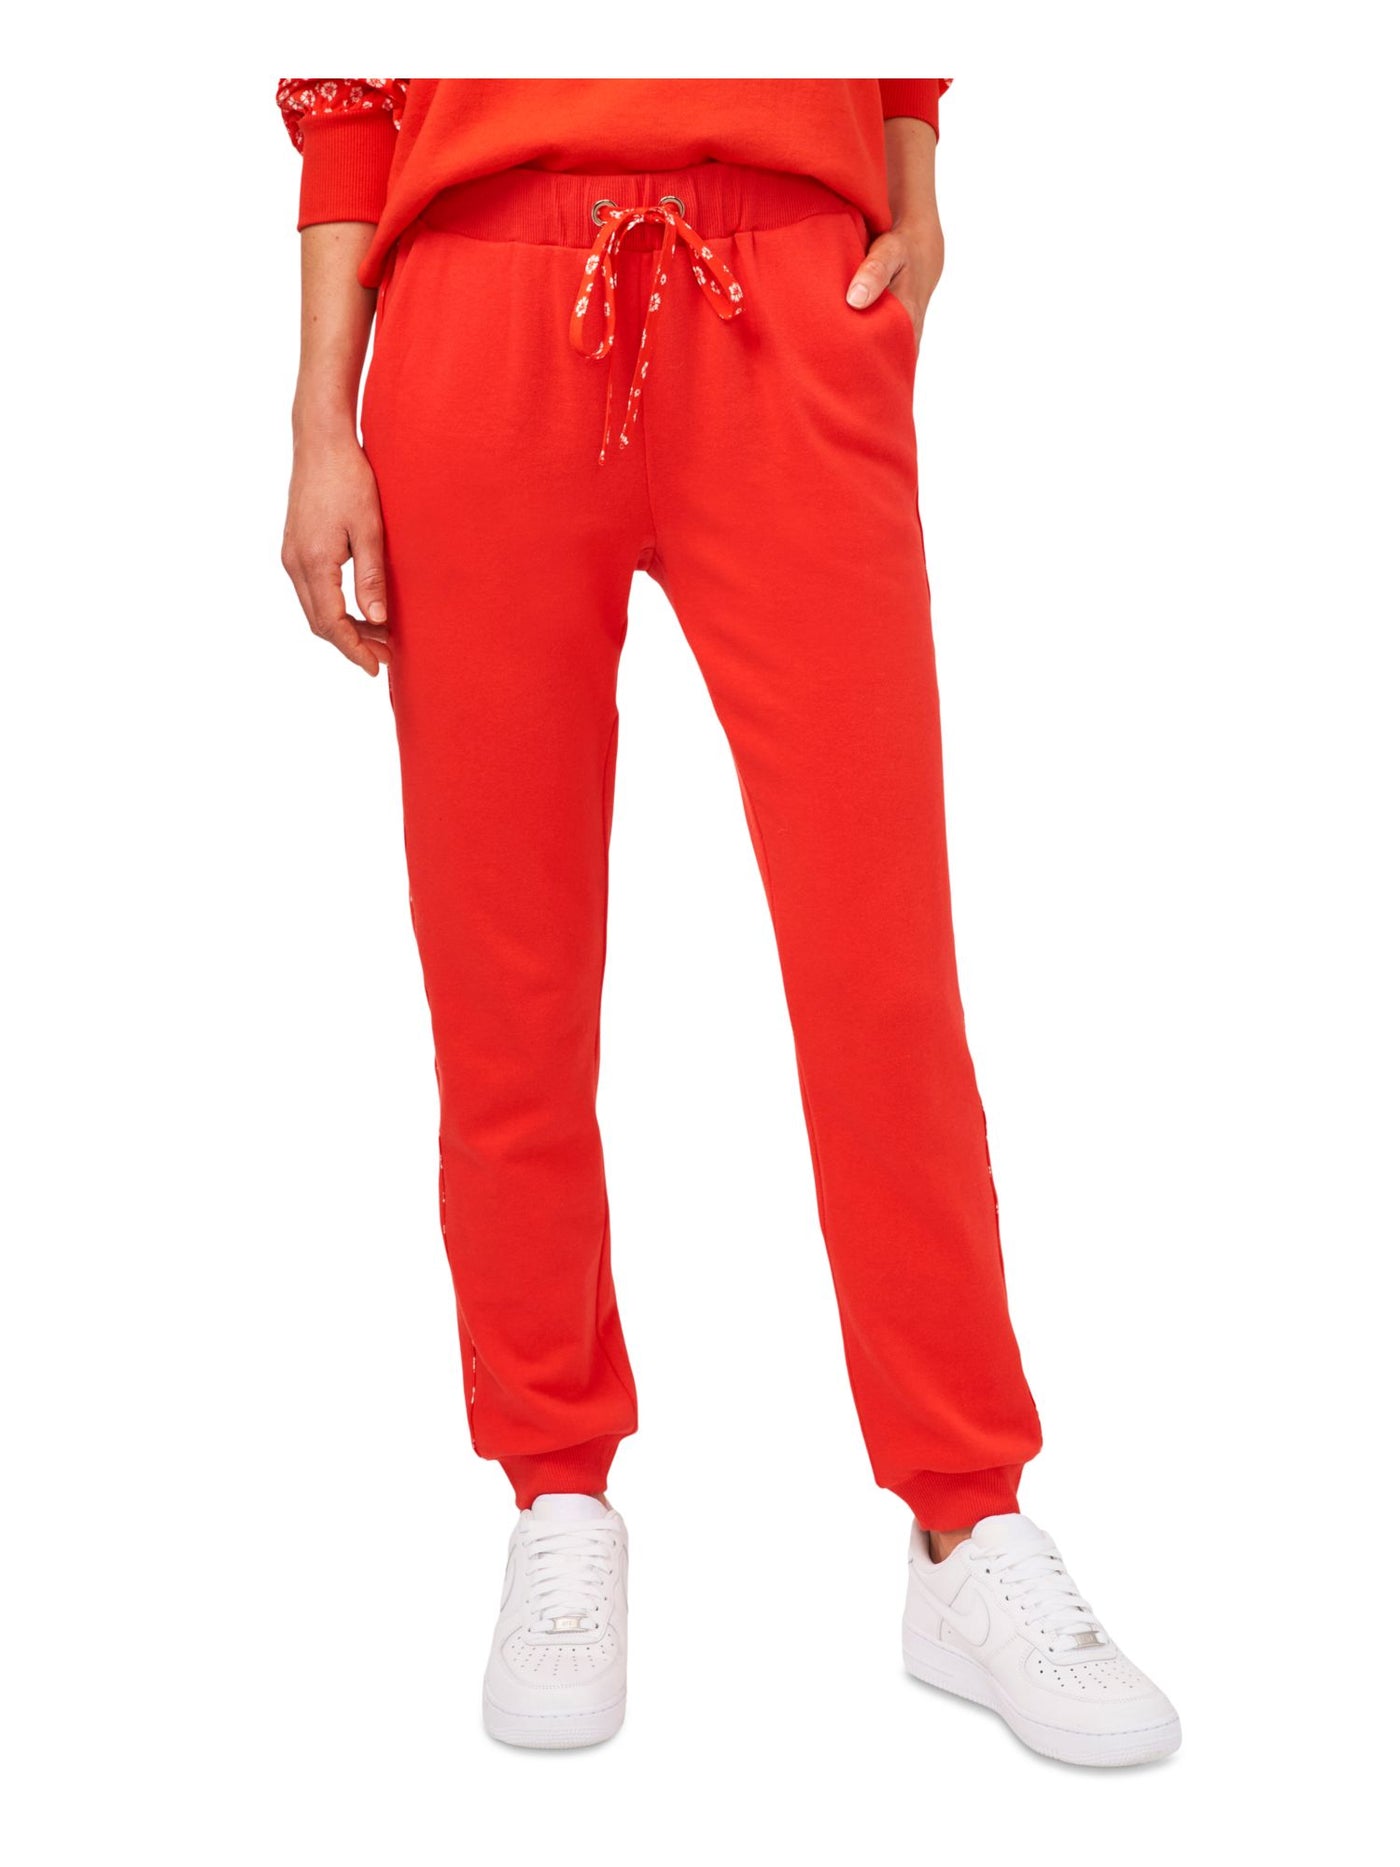 RILEY&RAE Womens Red Pocketed Tie Side Stripes Jogger Lounge Pants M